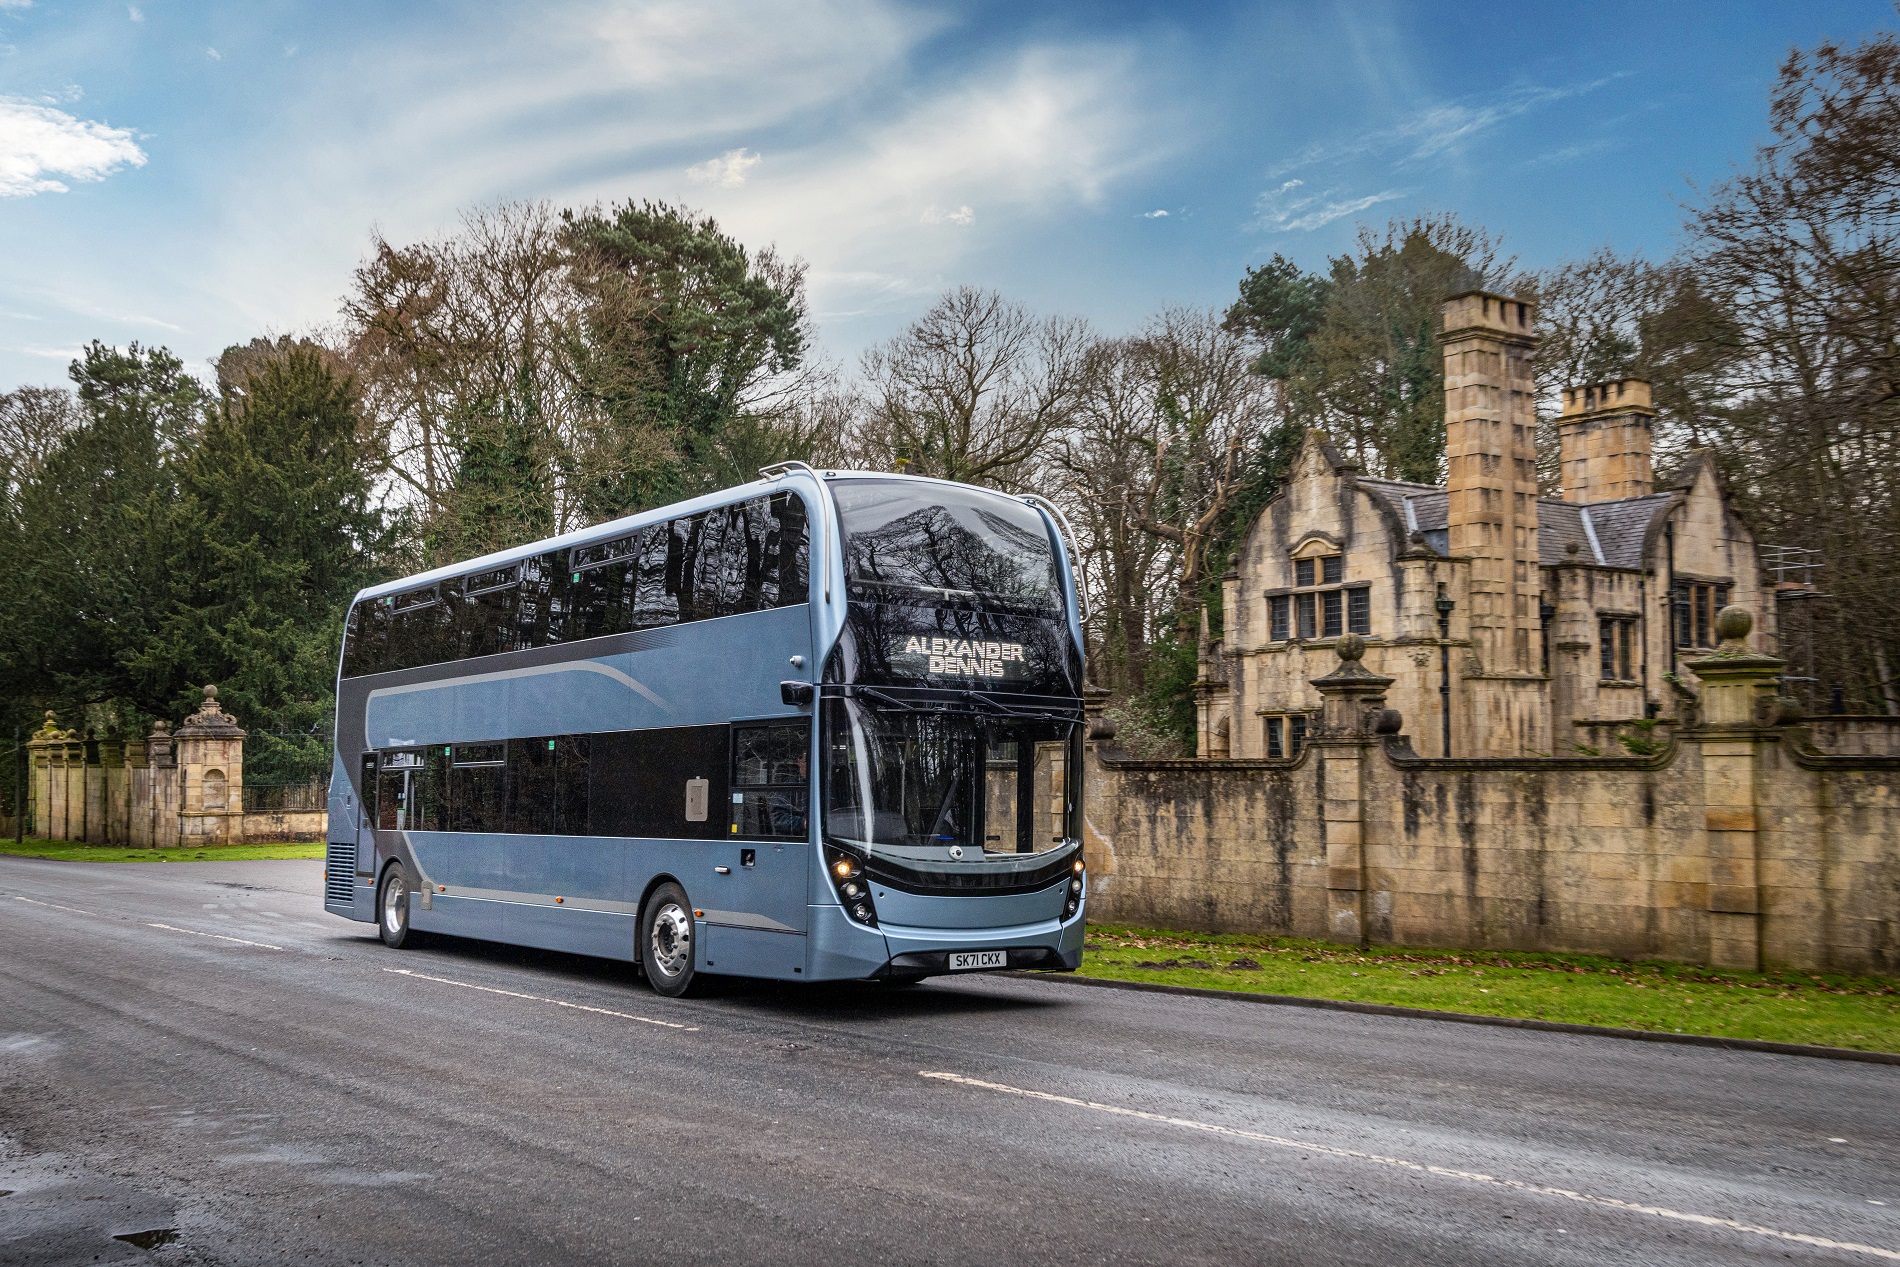 Enviro400 order is a first for Stephensons of Essex